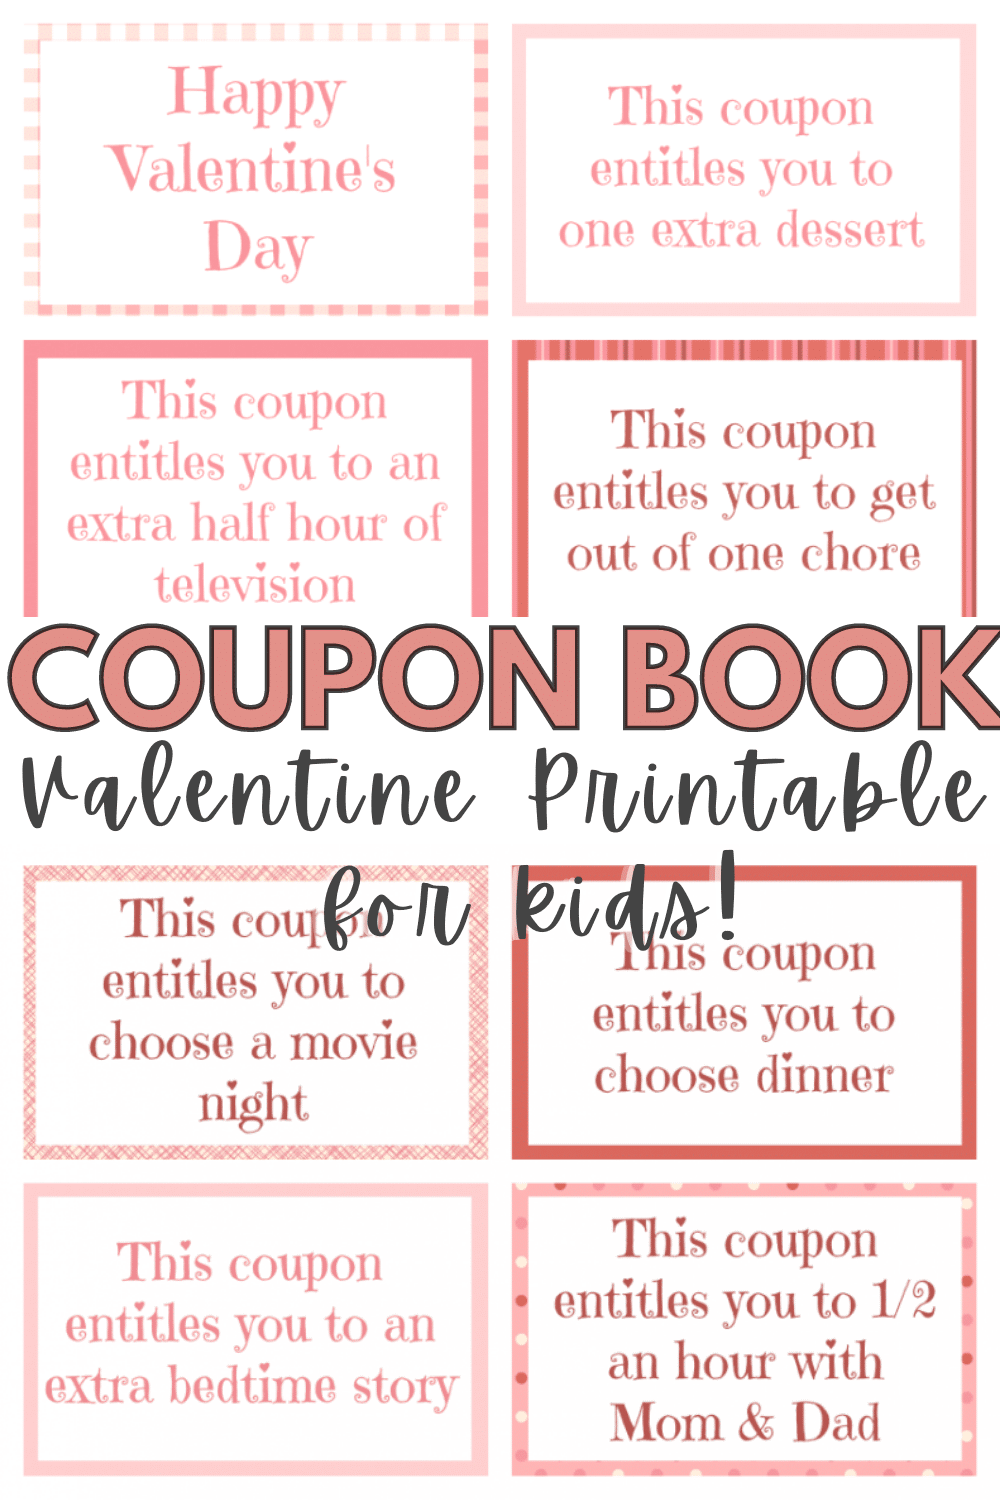 This Printable Valentine Coupon Book for Kids is a fun and easy way to show your love for children. Even better, it won't cause cavities! #valentinesday #forkids #printable #couponbook via @wondermomwannab